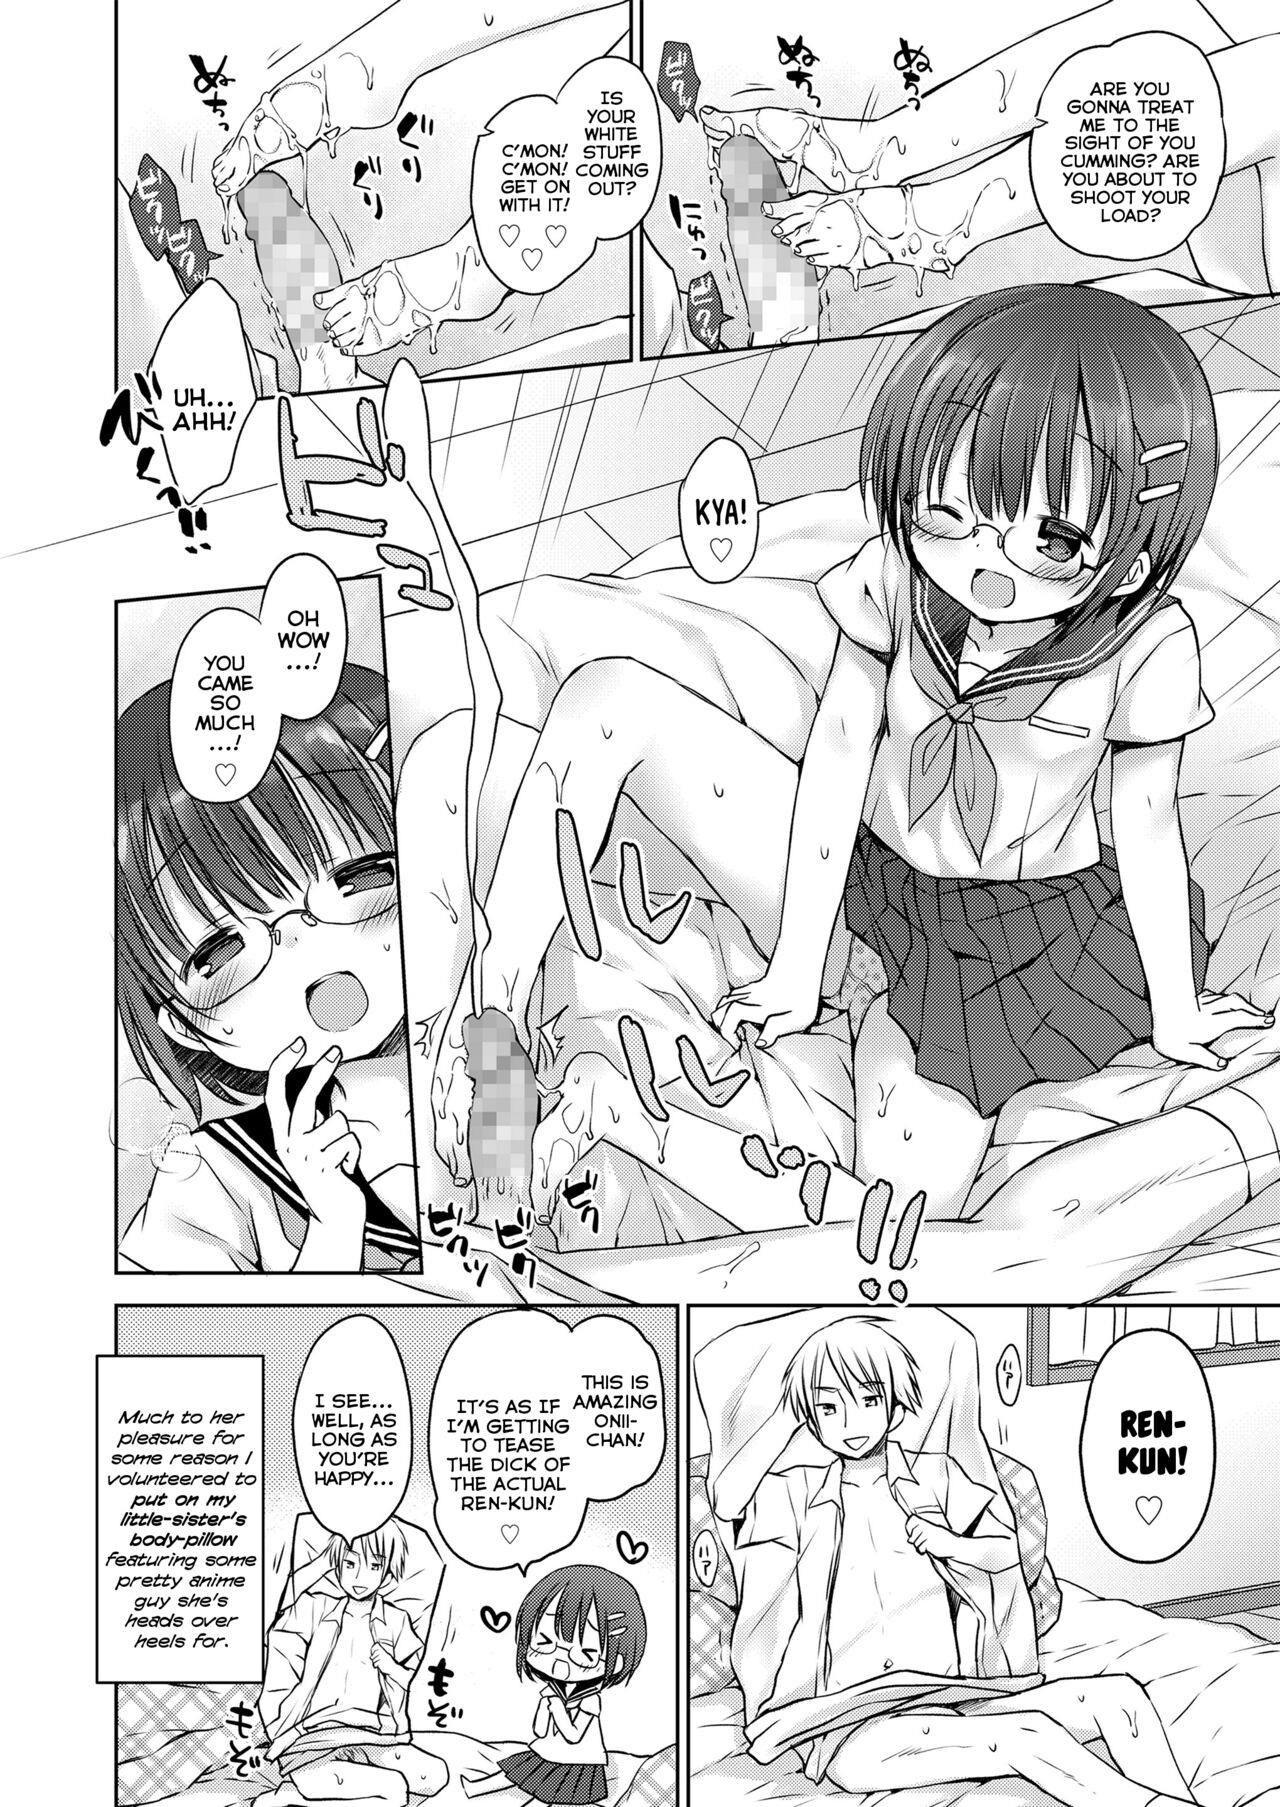 Don't Treat Me As A Child Vol.1 Chapter 4: My Middle-School Little-Sister's Sadist Mode - Picture 2